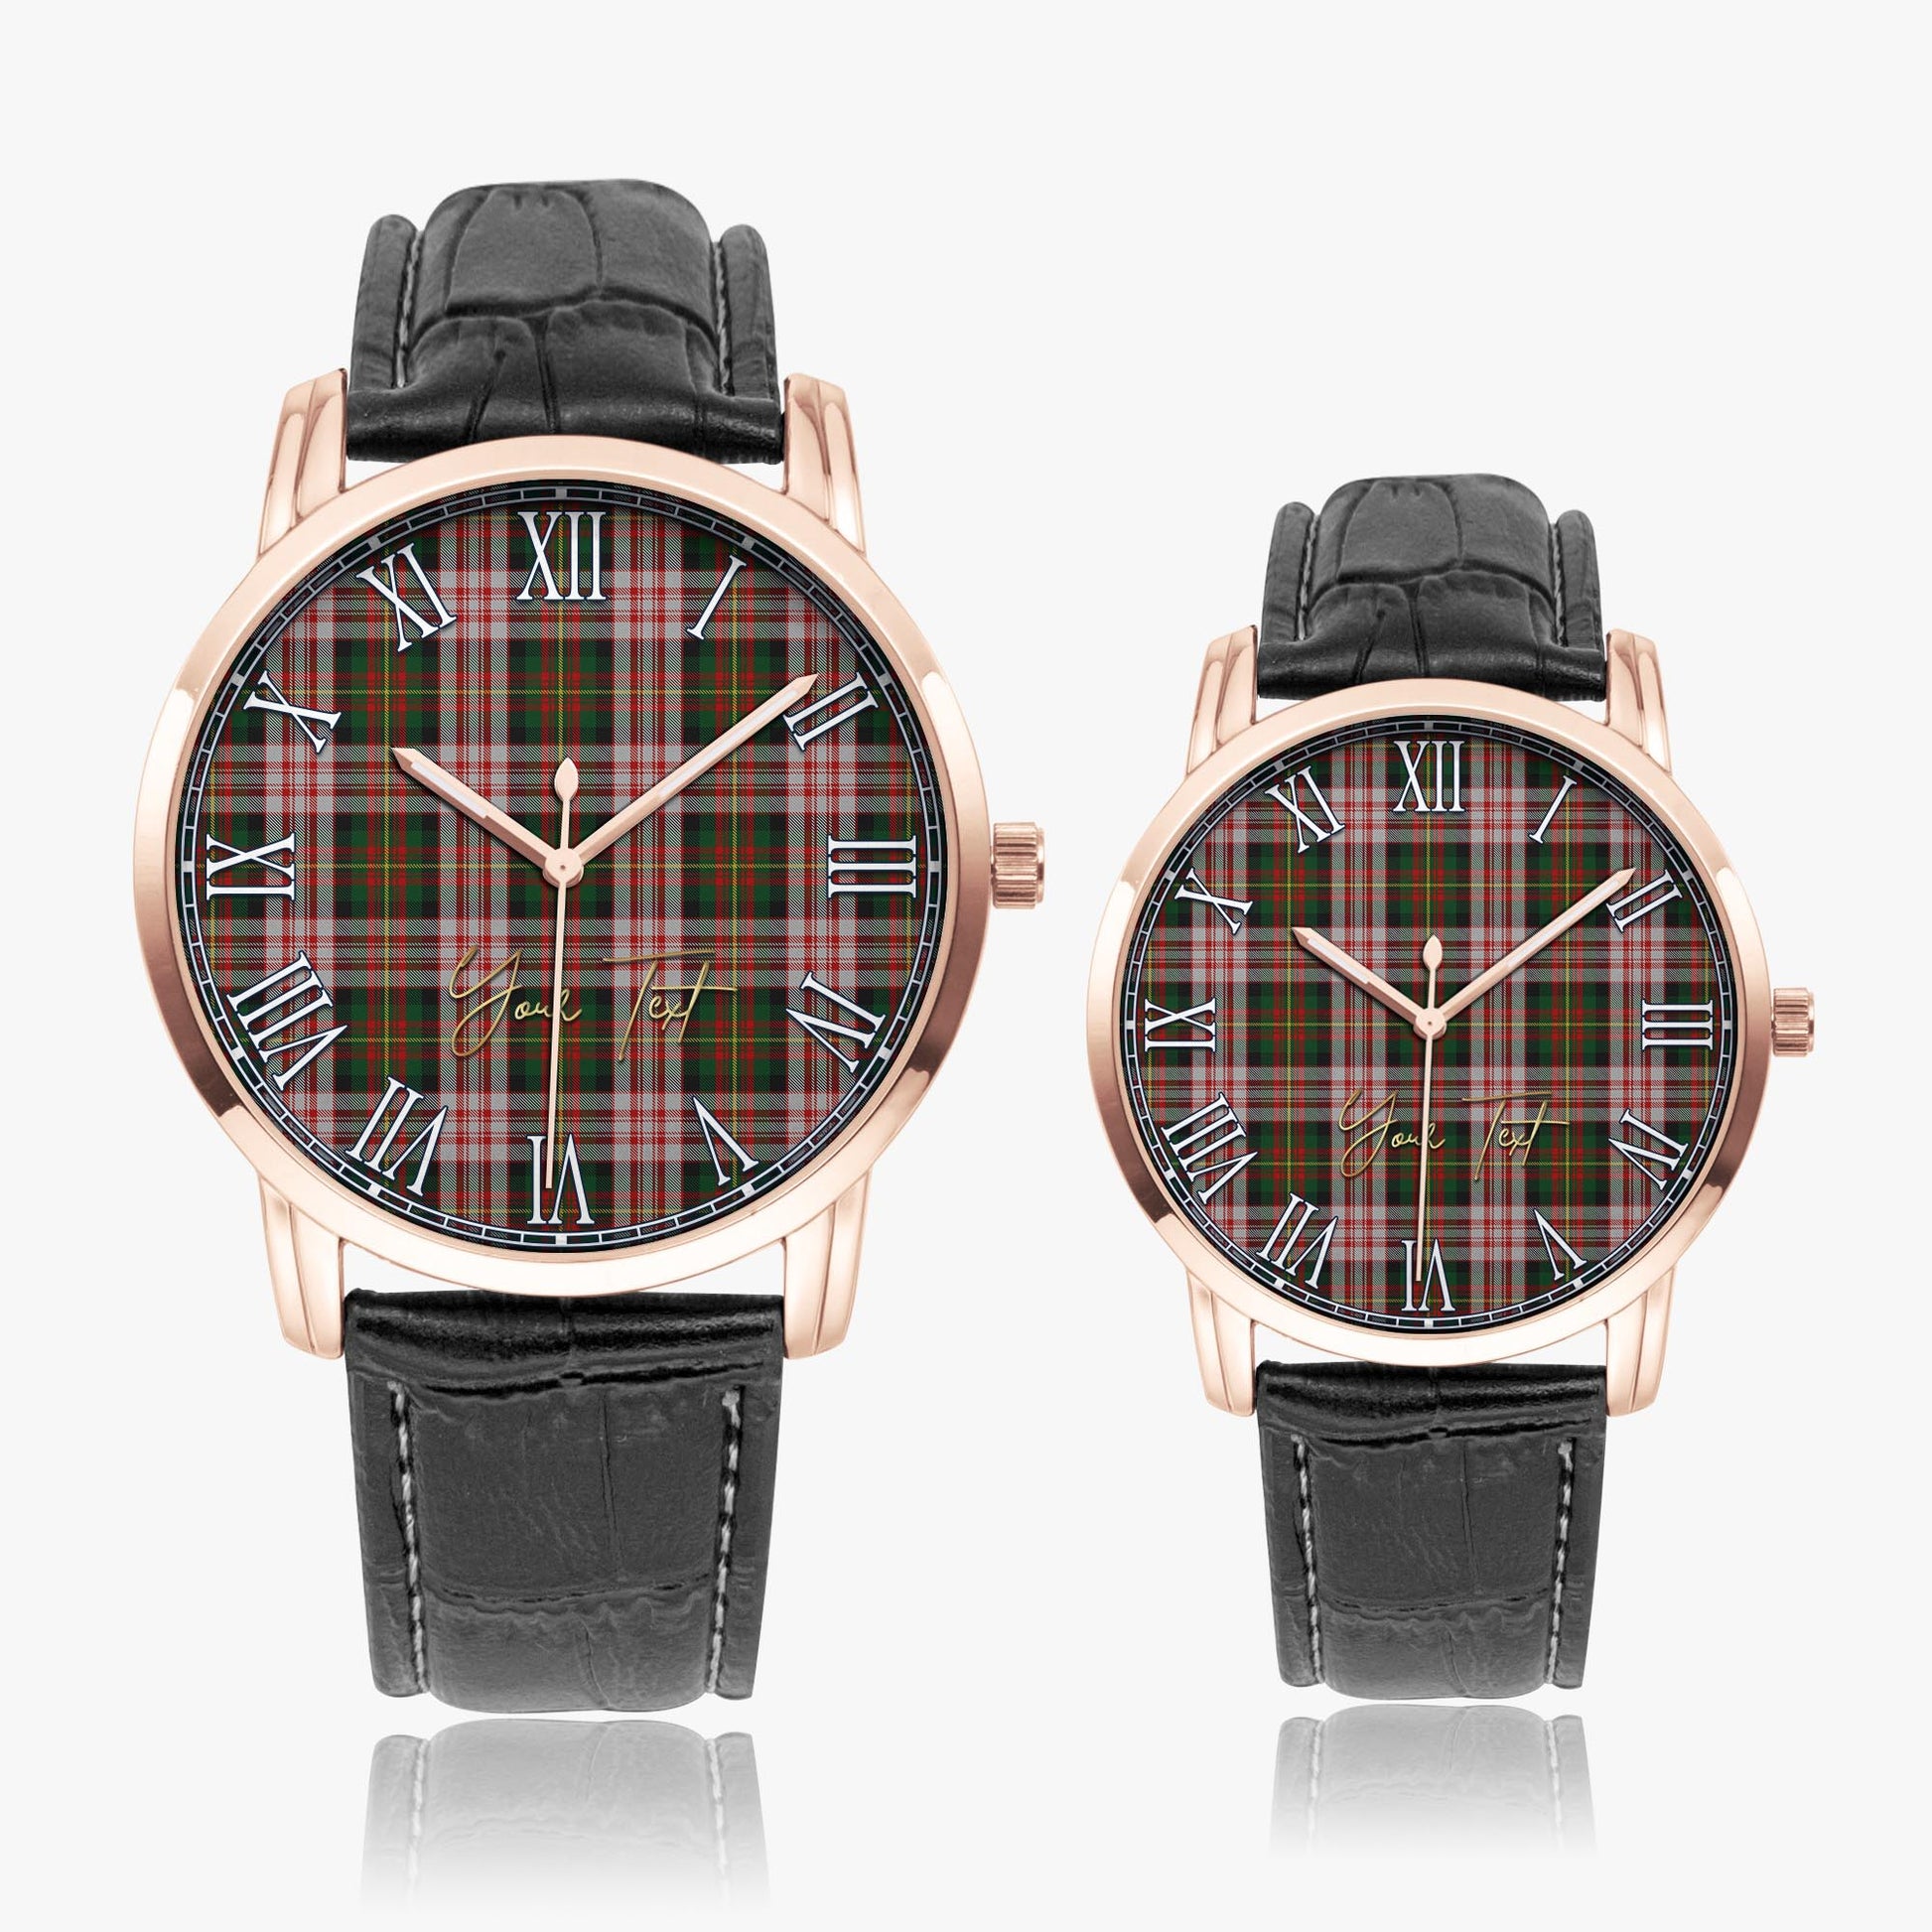 Carnegie Dress Tartan Personalized Your Text Leather Trap Quartz Watch Wide Type Rose Gold Case With Black Leather Strap - Tartanvibesclothing